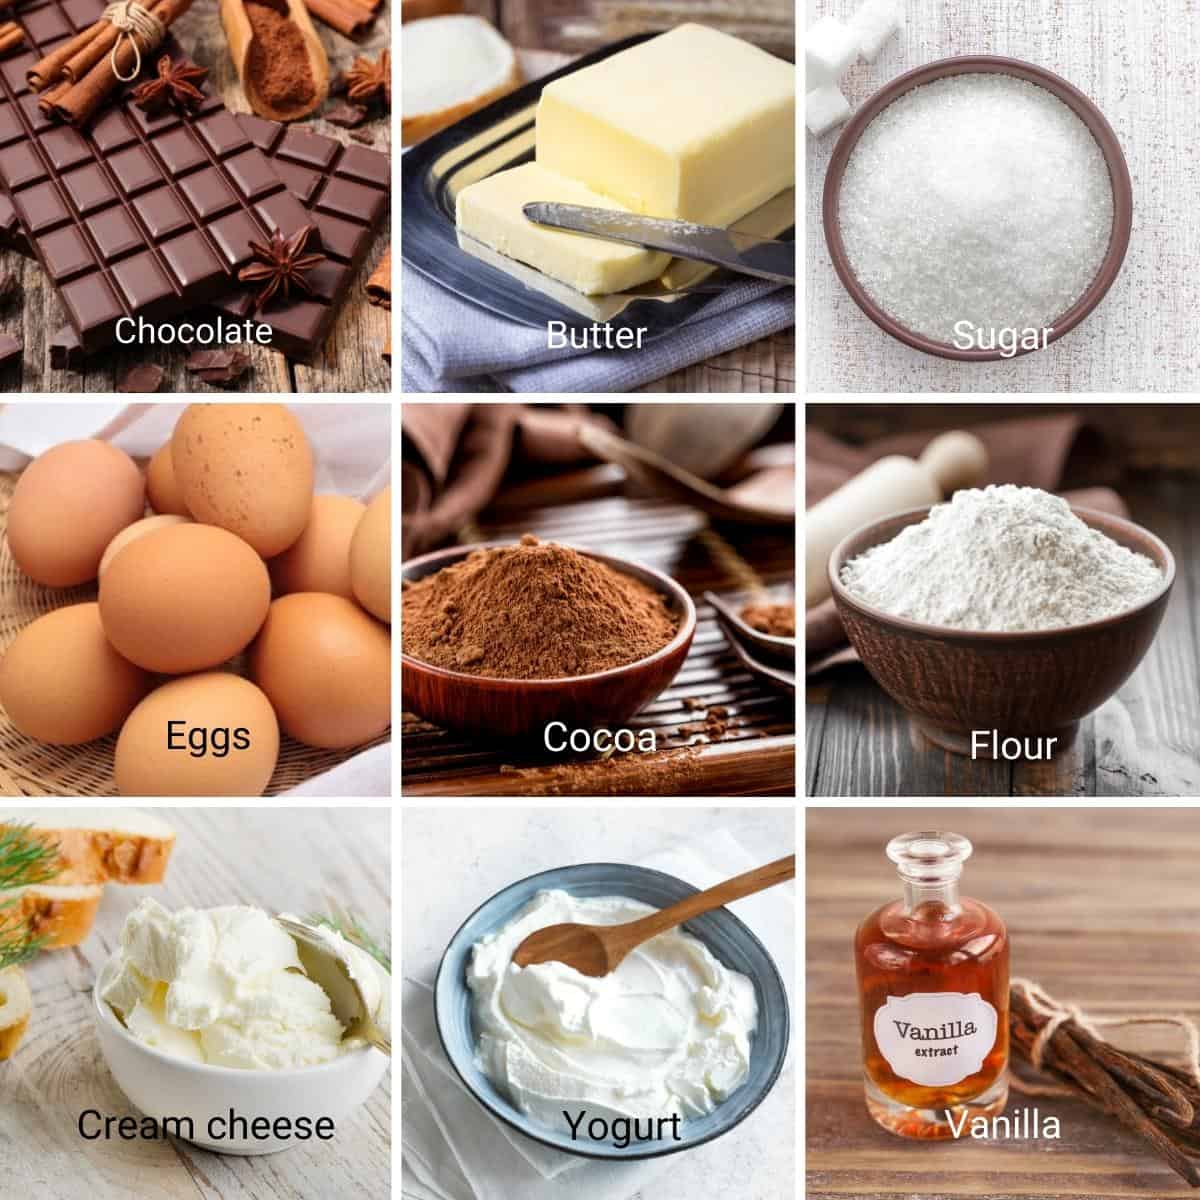 Ingredients for making brownies with cream cheese.